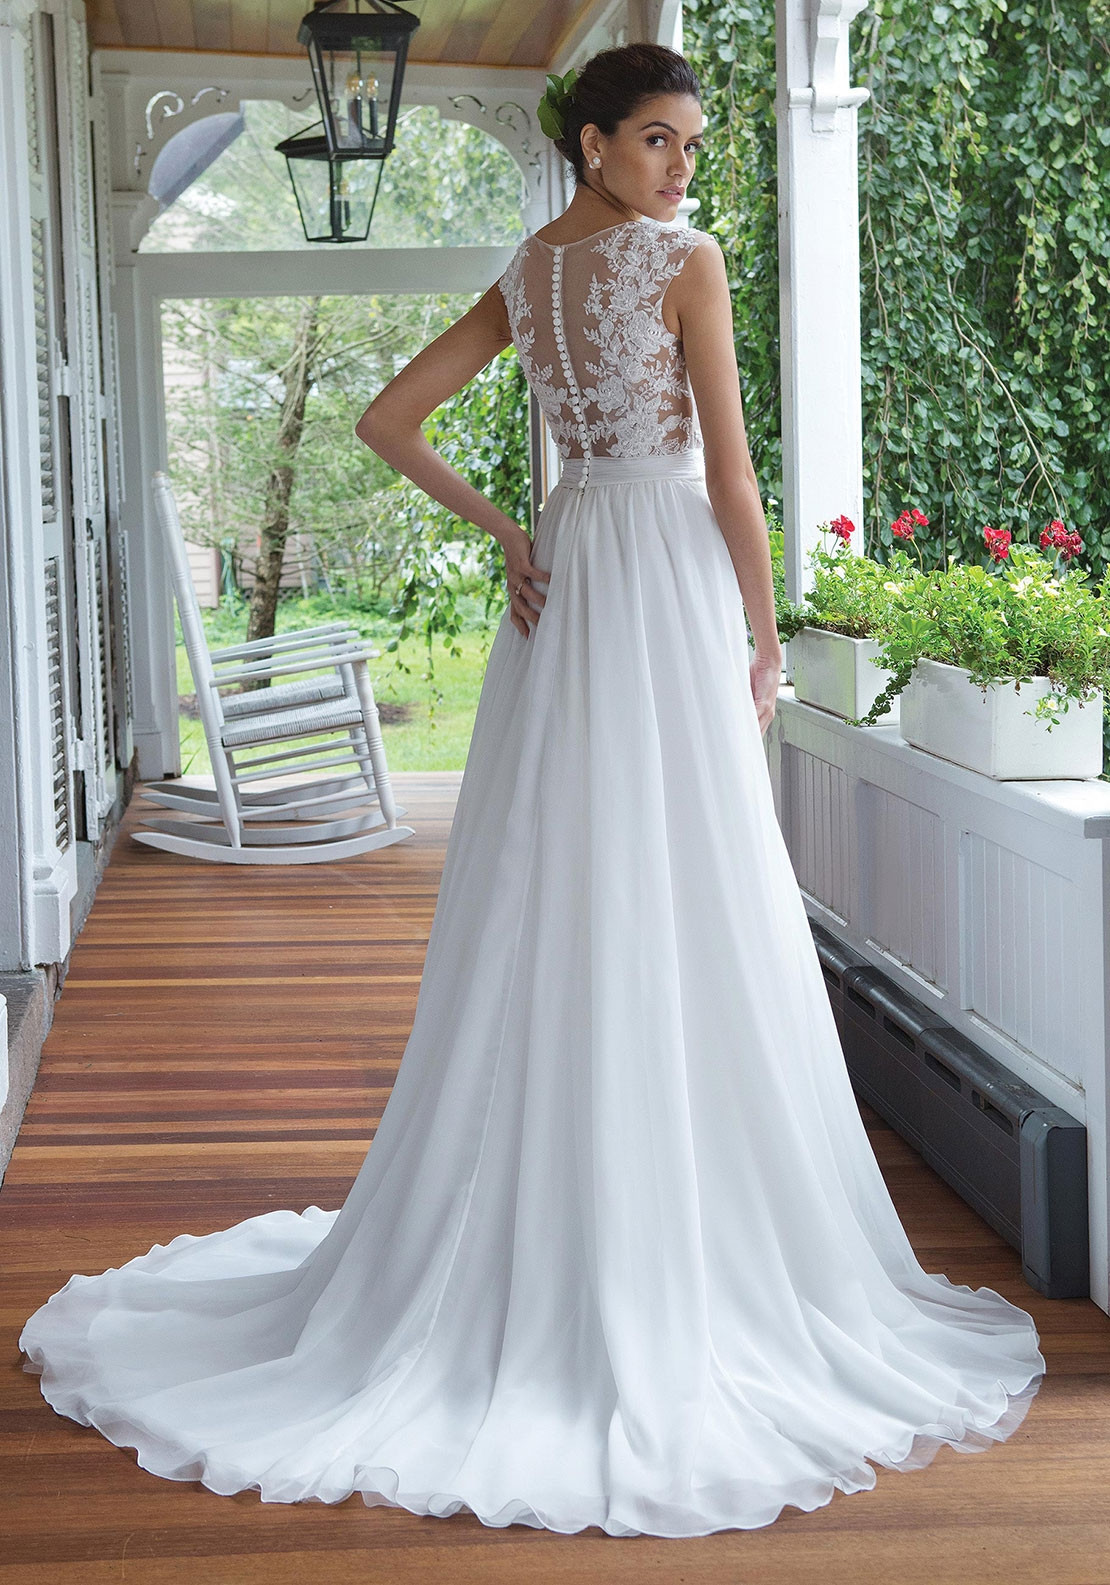 sweetheart-outlet-wedding-dress-11052-gown-sublime-wedding-shop